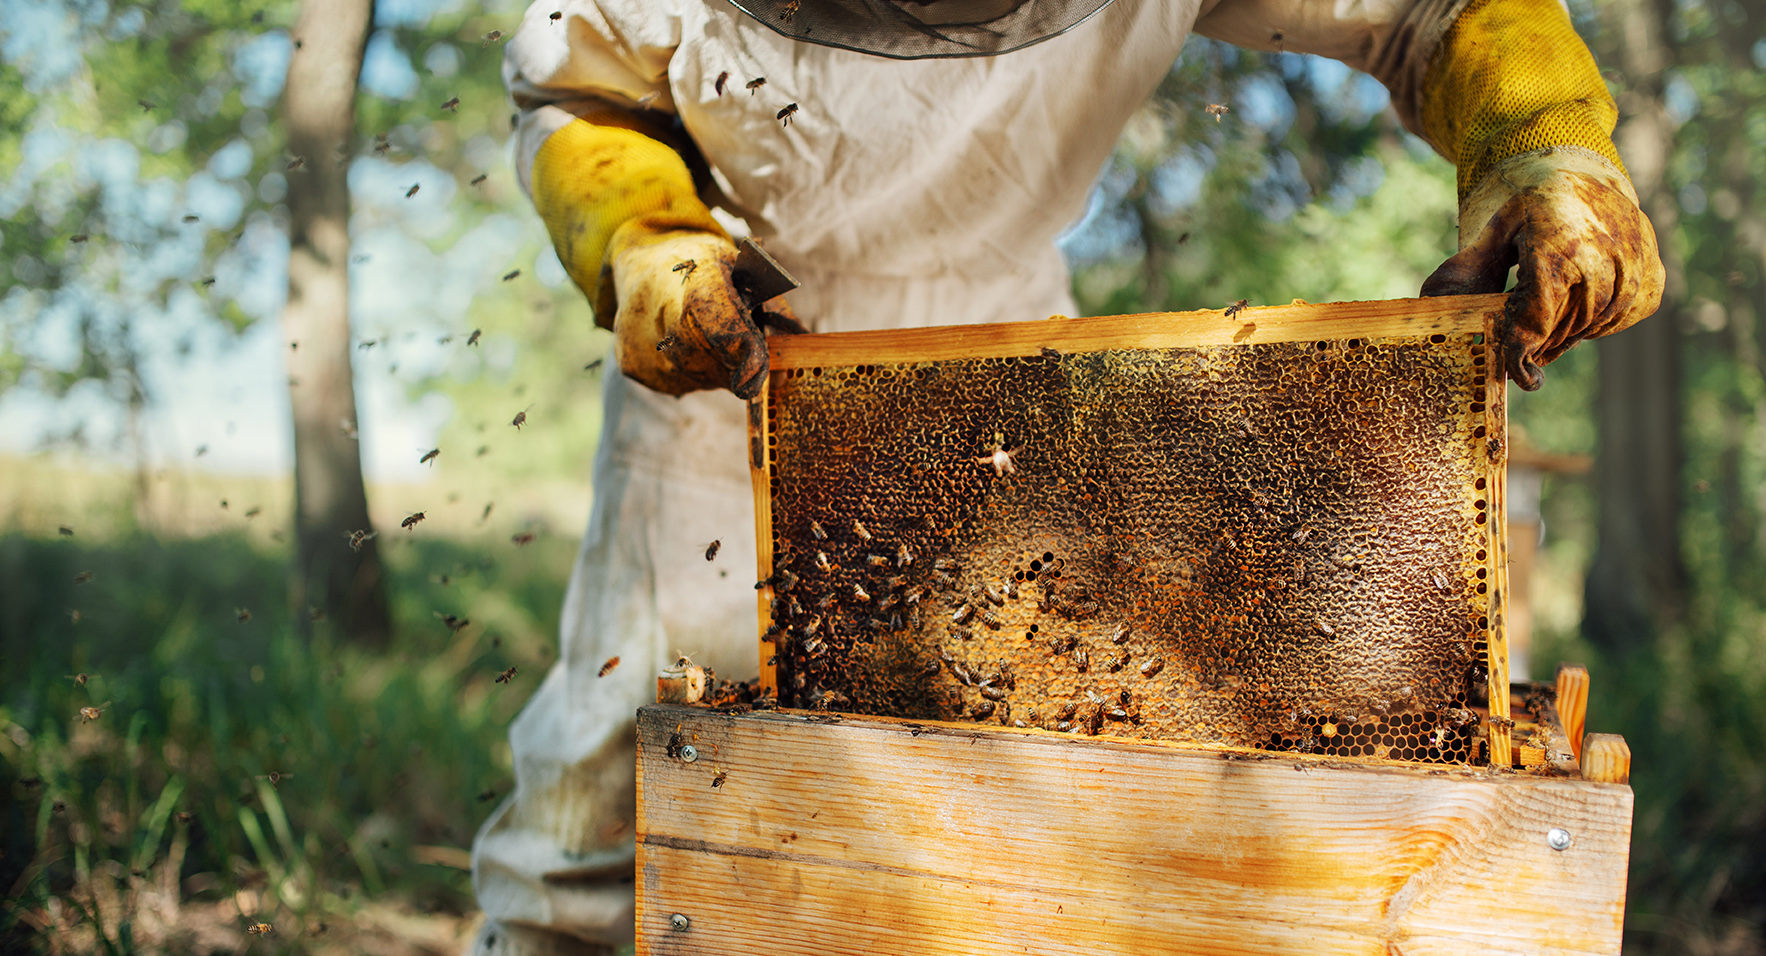 The beekeeper pulls out a frame with honey from the beehive.